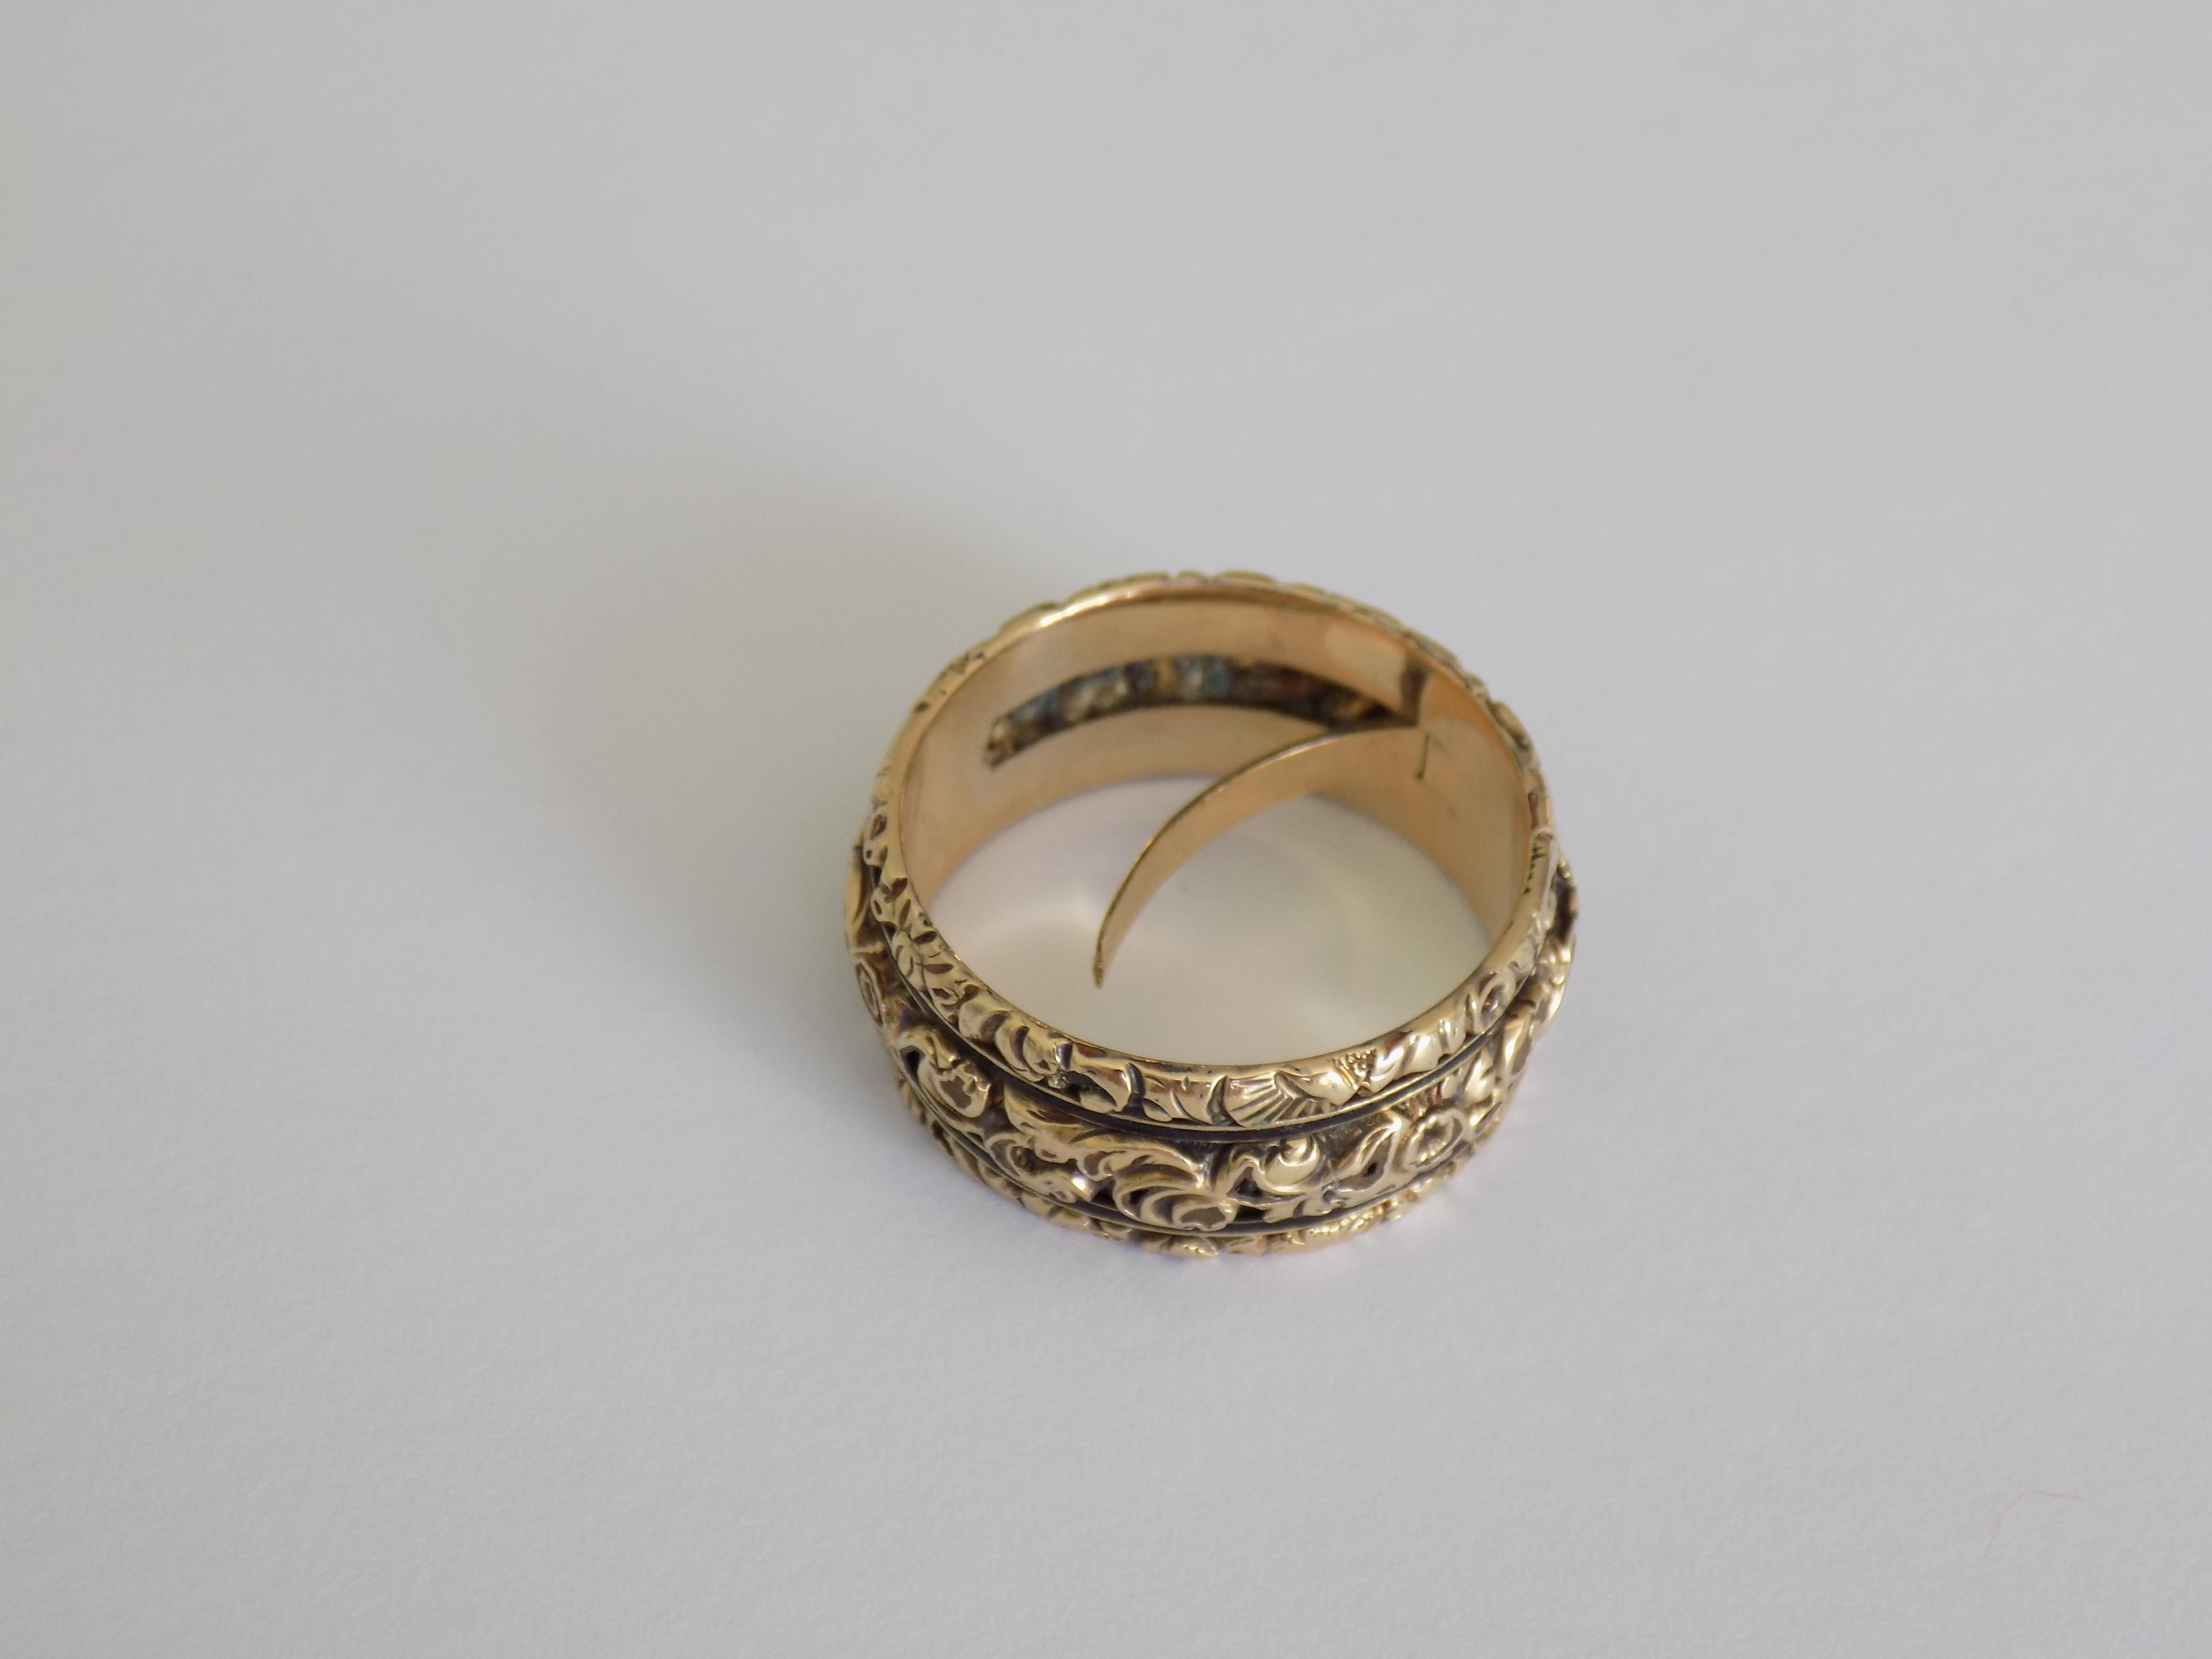 A Rare Georgian c.1820 beautifully hand chased with flowers and foliage gold band with a hidden compartment. The band has a secret compartment that opens from inside. It contains a lock of woven hair that has remained intact. English origin.
Size L